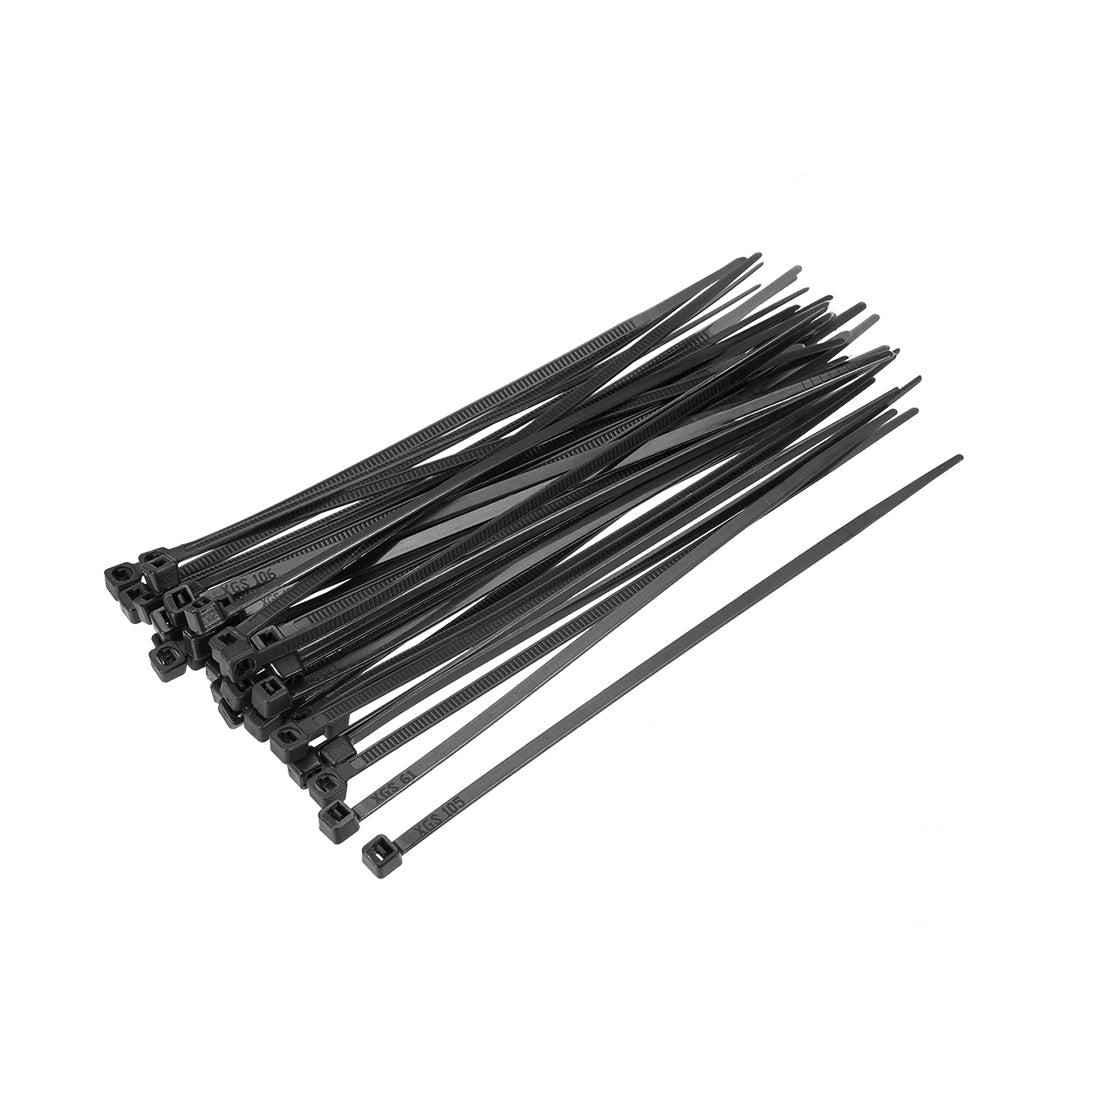 Uxcell Uxcell Cable Zip Ties 200mmx4mm Self-Locking Nylon Tie Wraps Black 150pcs